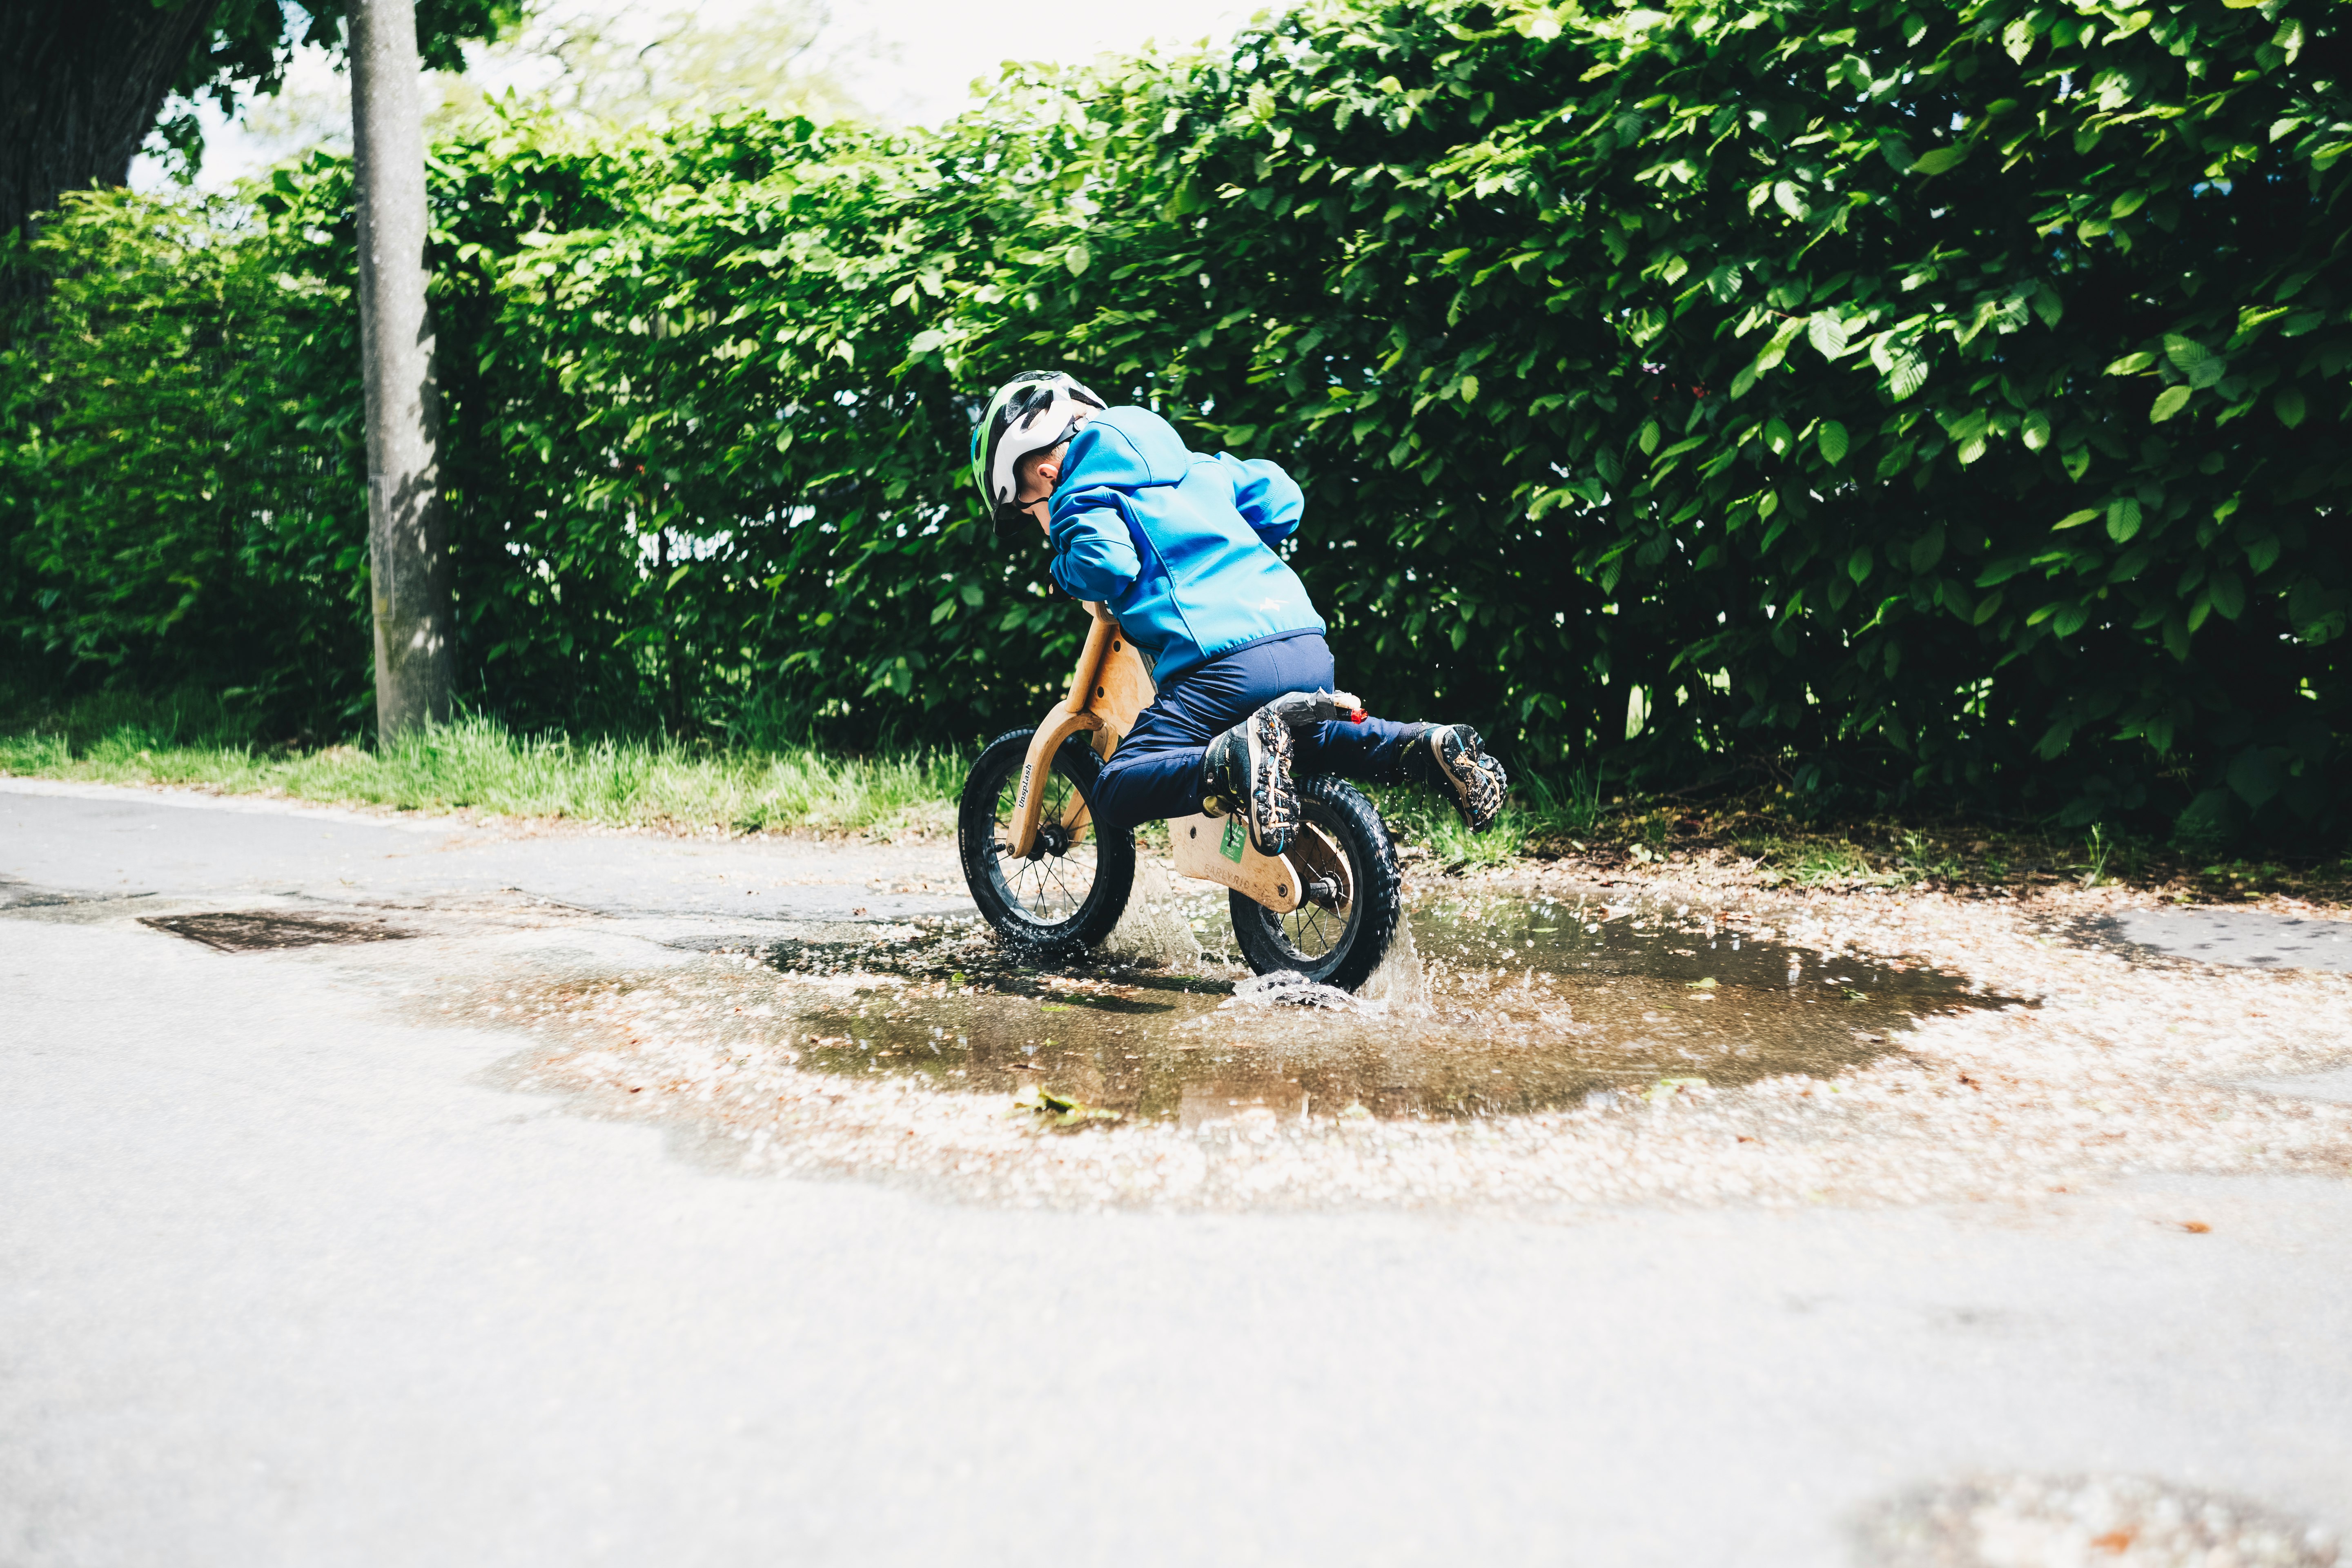 Young boy with training bike balance bike rides through the puddle. Made with Canon 5d Mark III and loved analog lens, Helios 44M 2.0 / 58mm (Year: 1977)